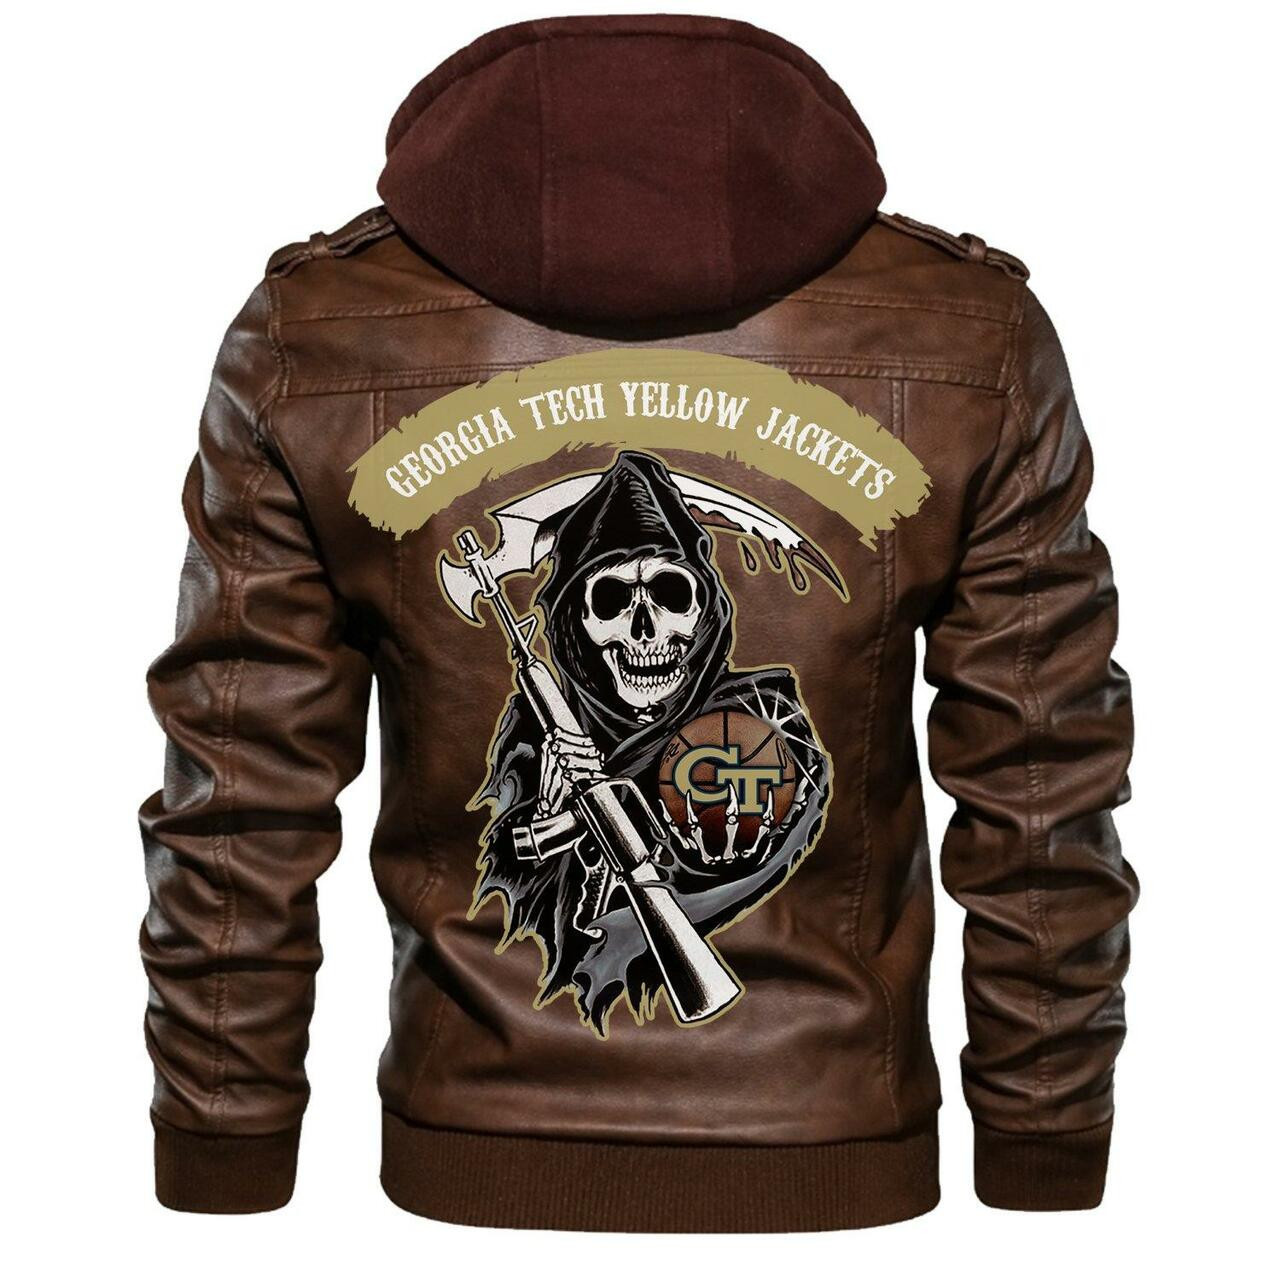 If you're looking for a trendy shirt hoodie, check out below 3